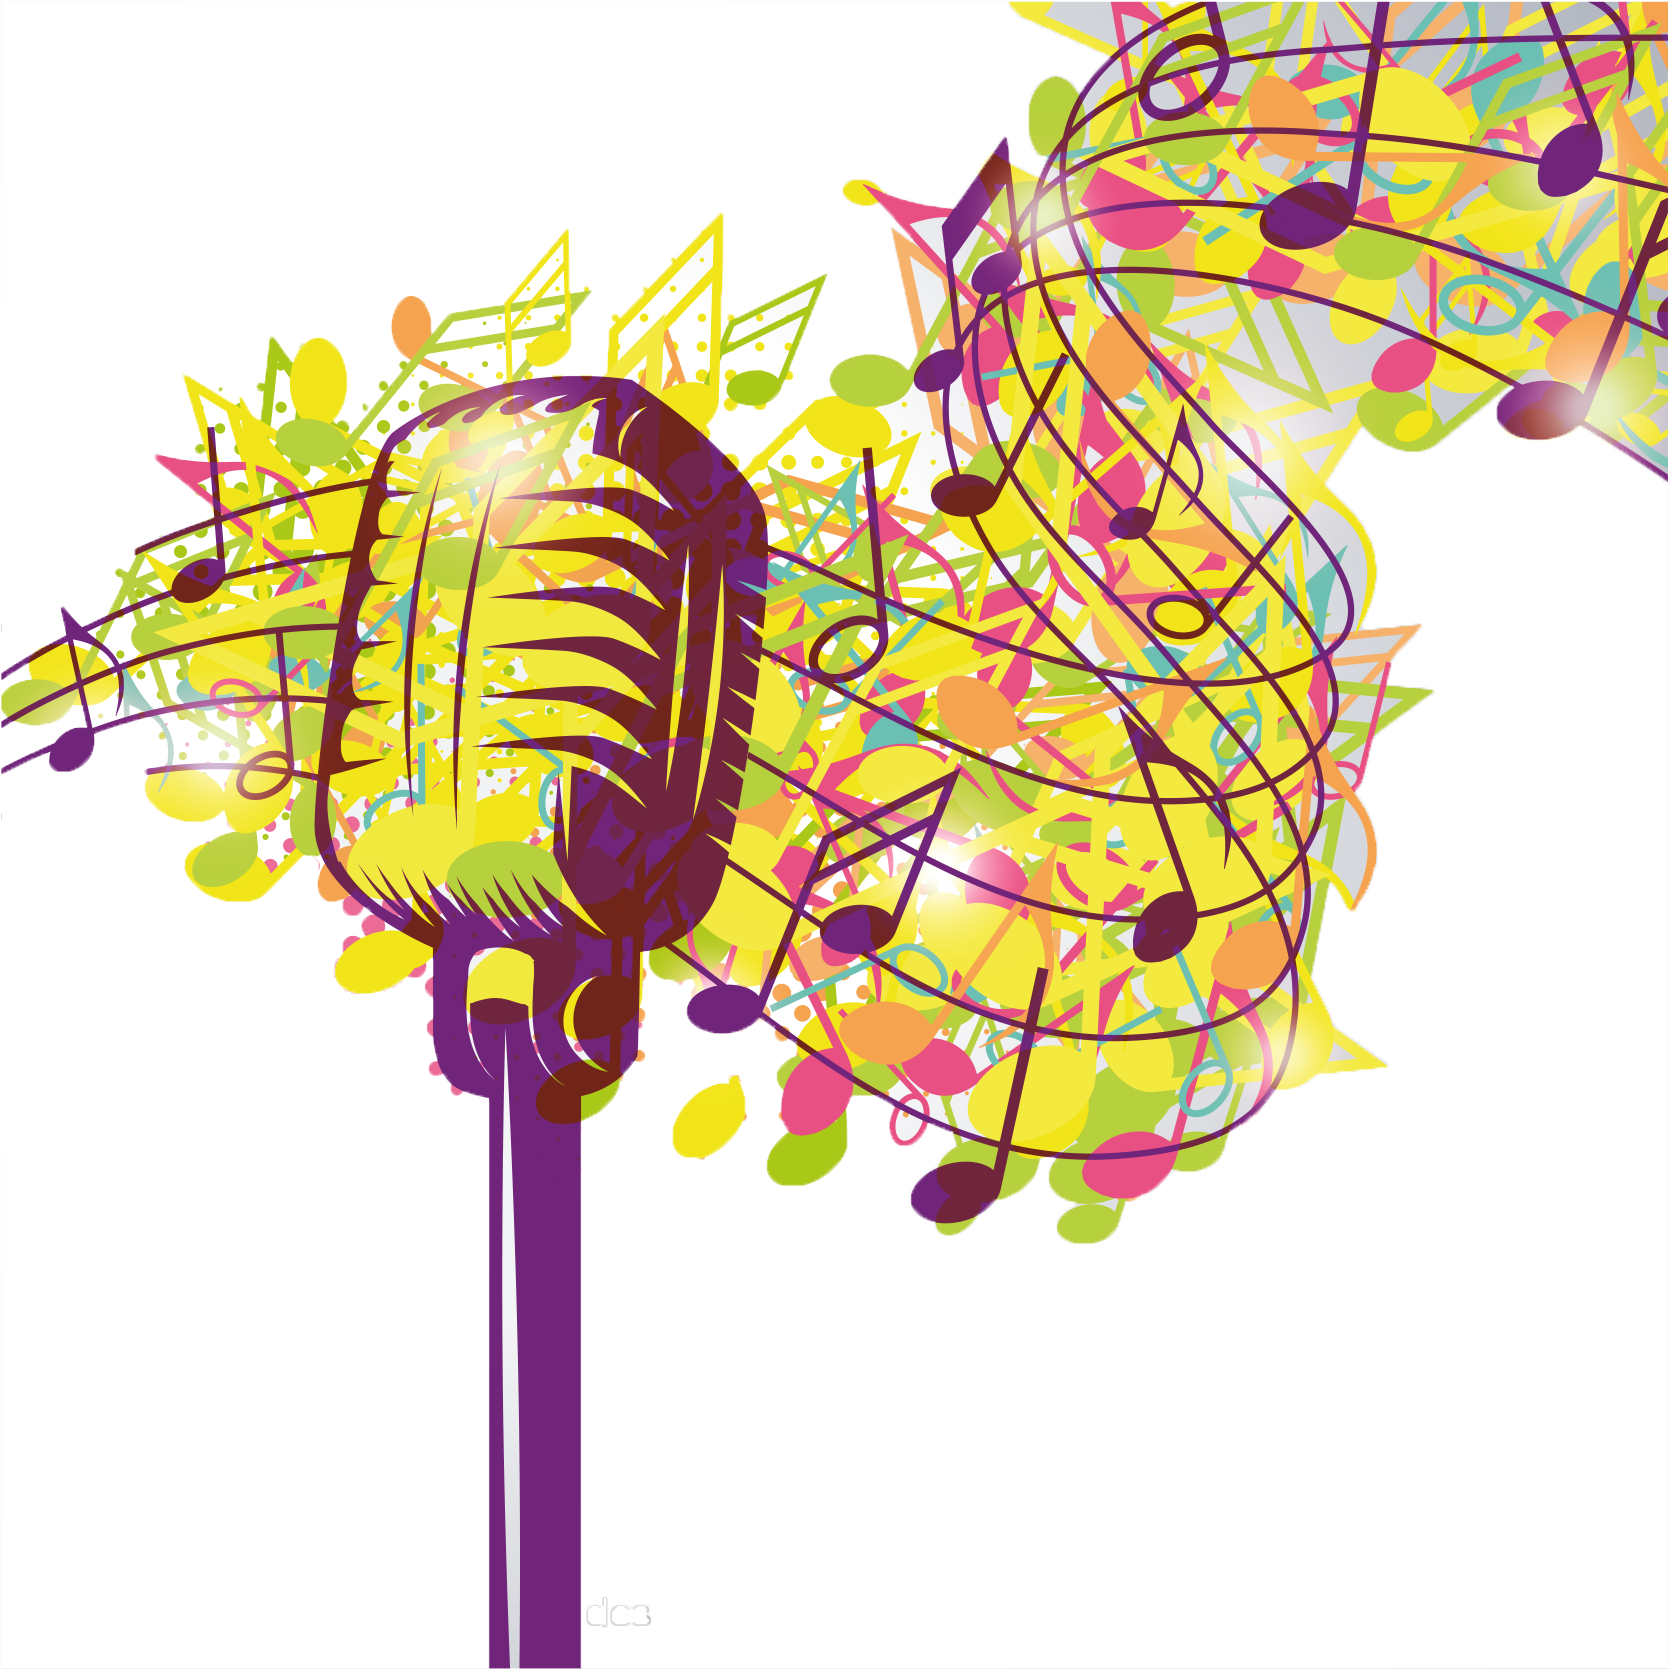 Microphone Music 1980s - Colorful Retro Microphone Music Not Shower Curtain (1996x2023)